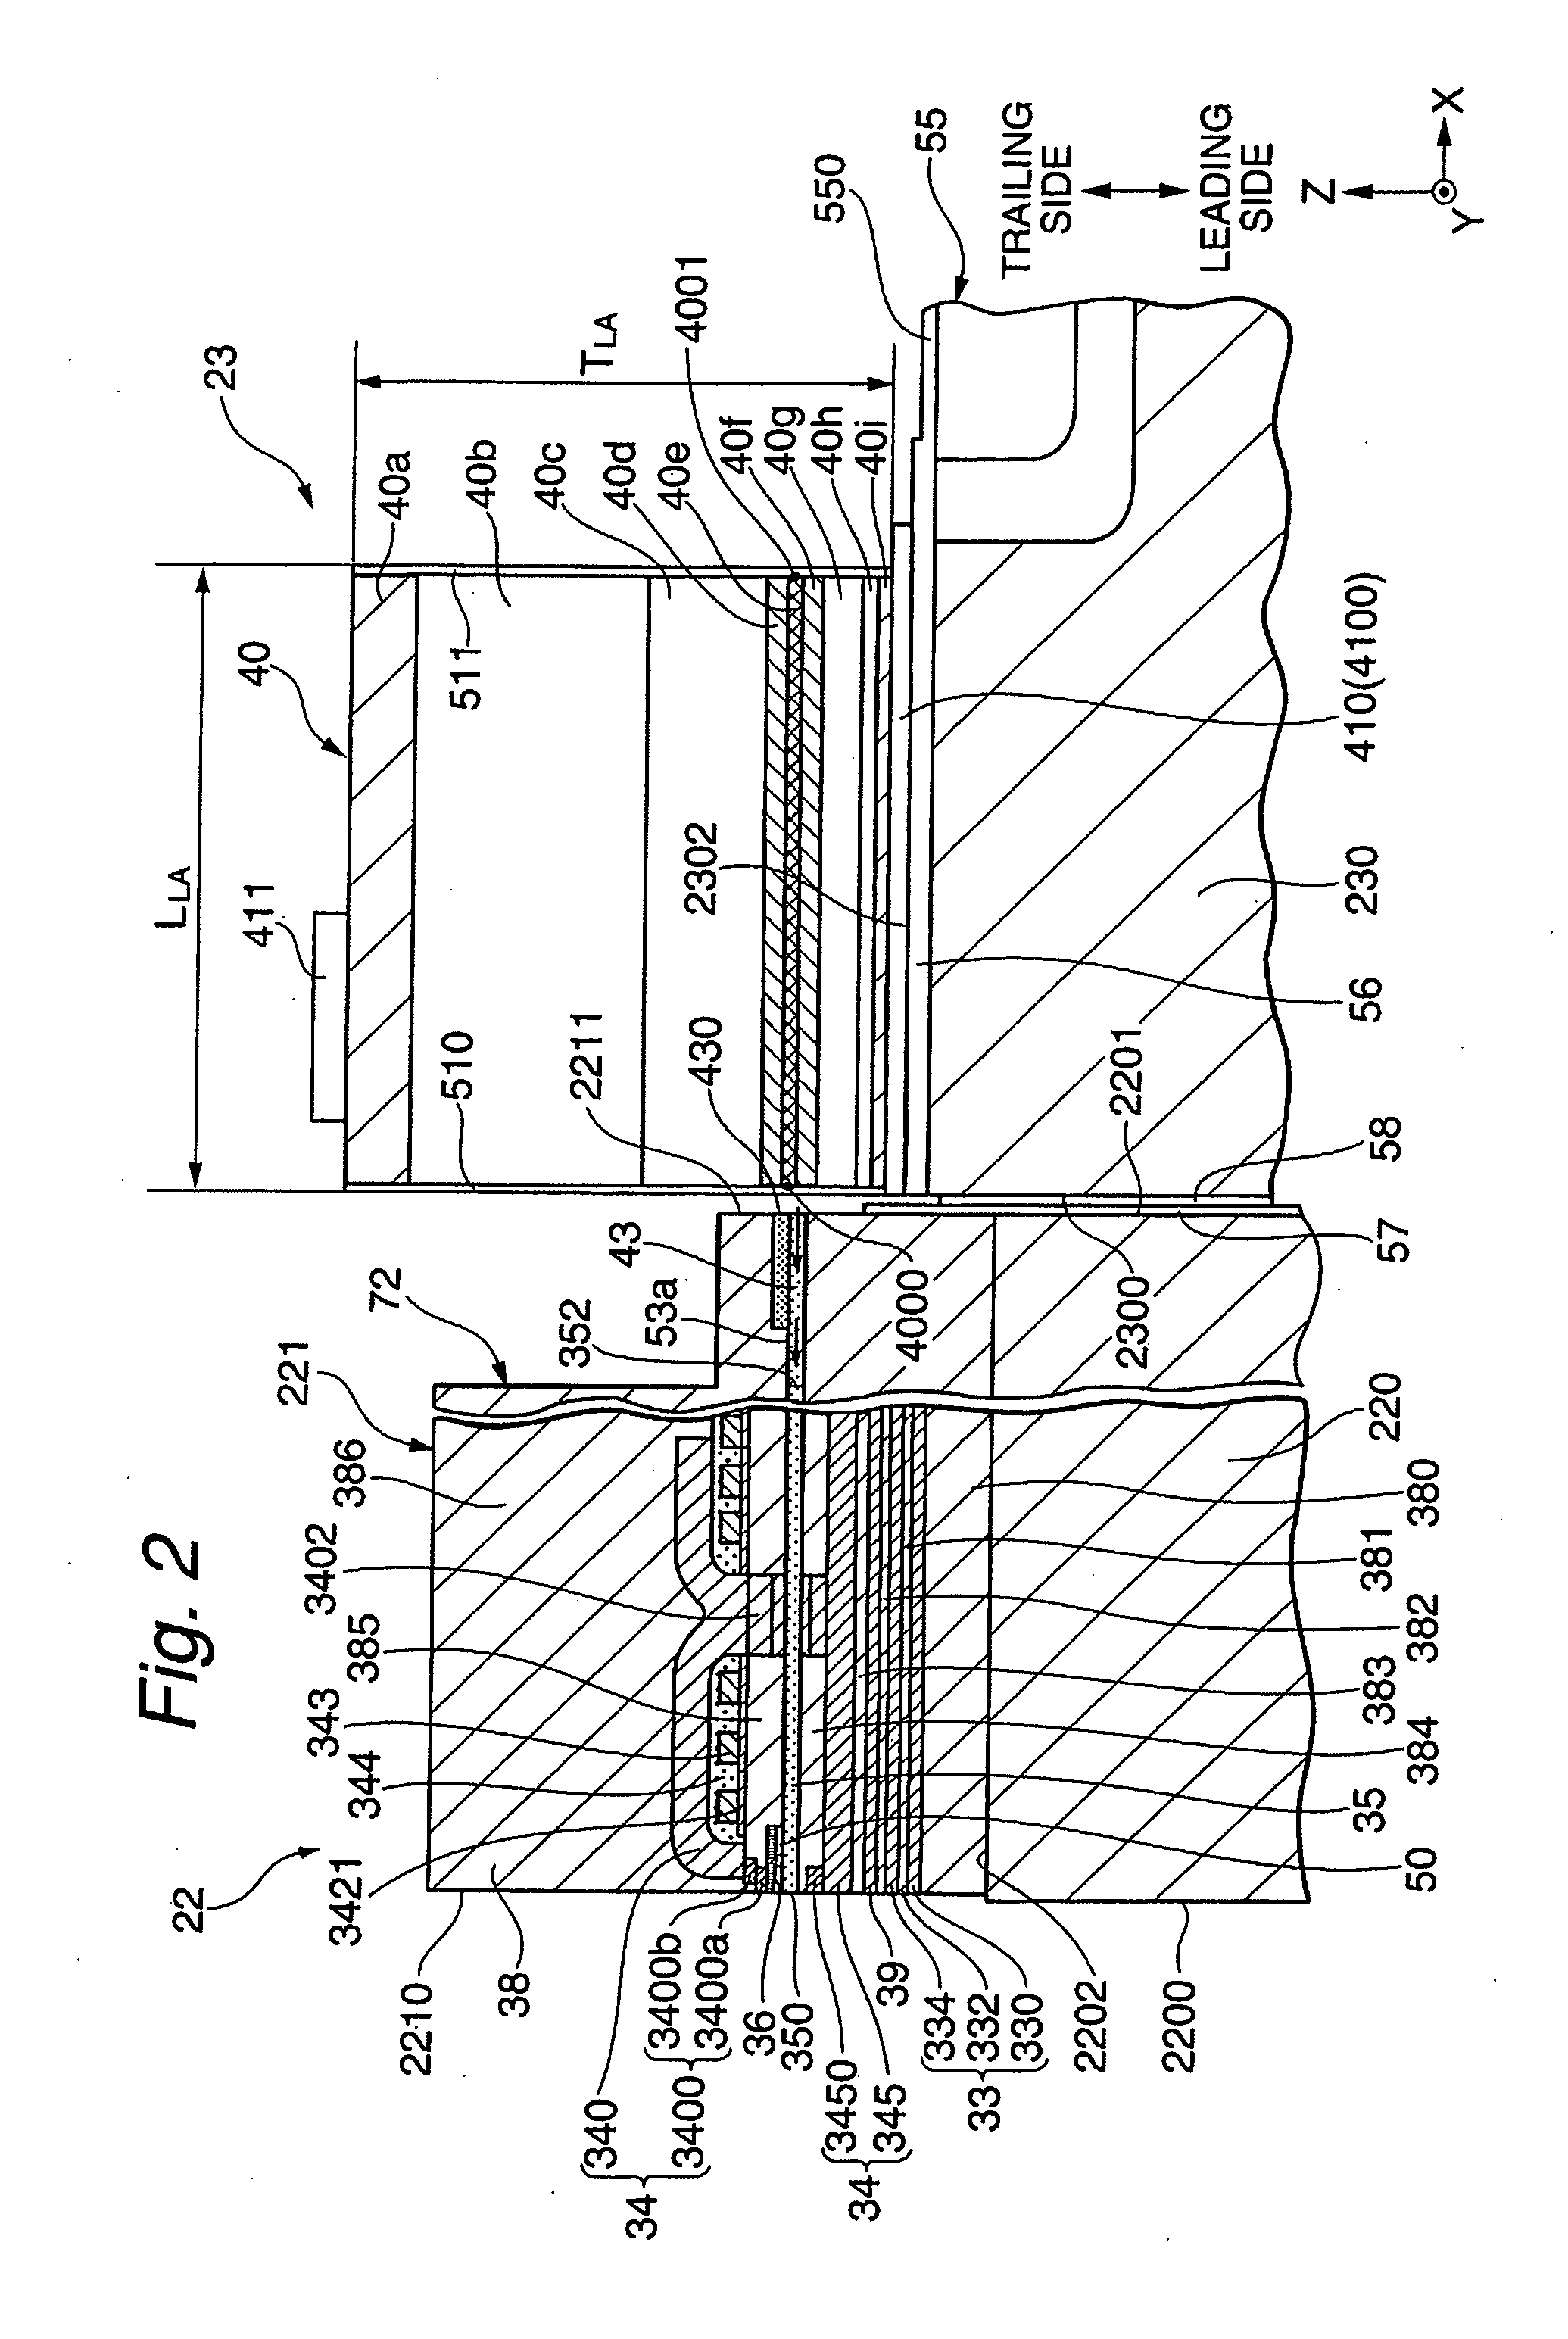 Head gimbal assembly with two wiring layers comprising thermally-assisted head